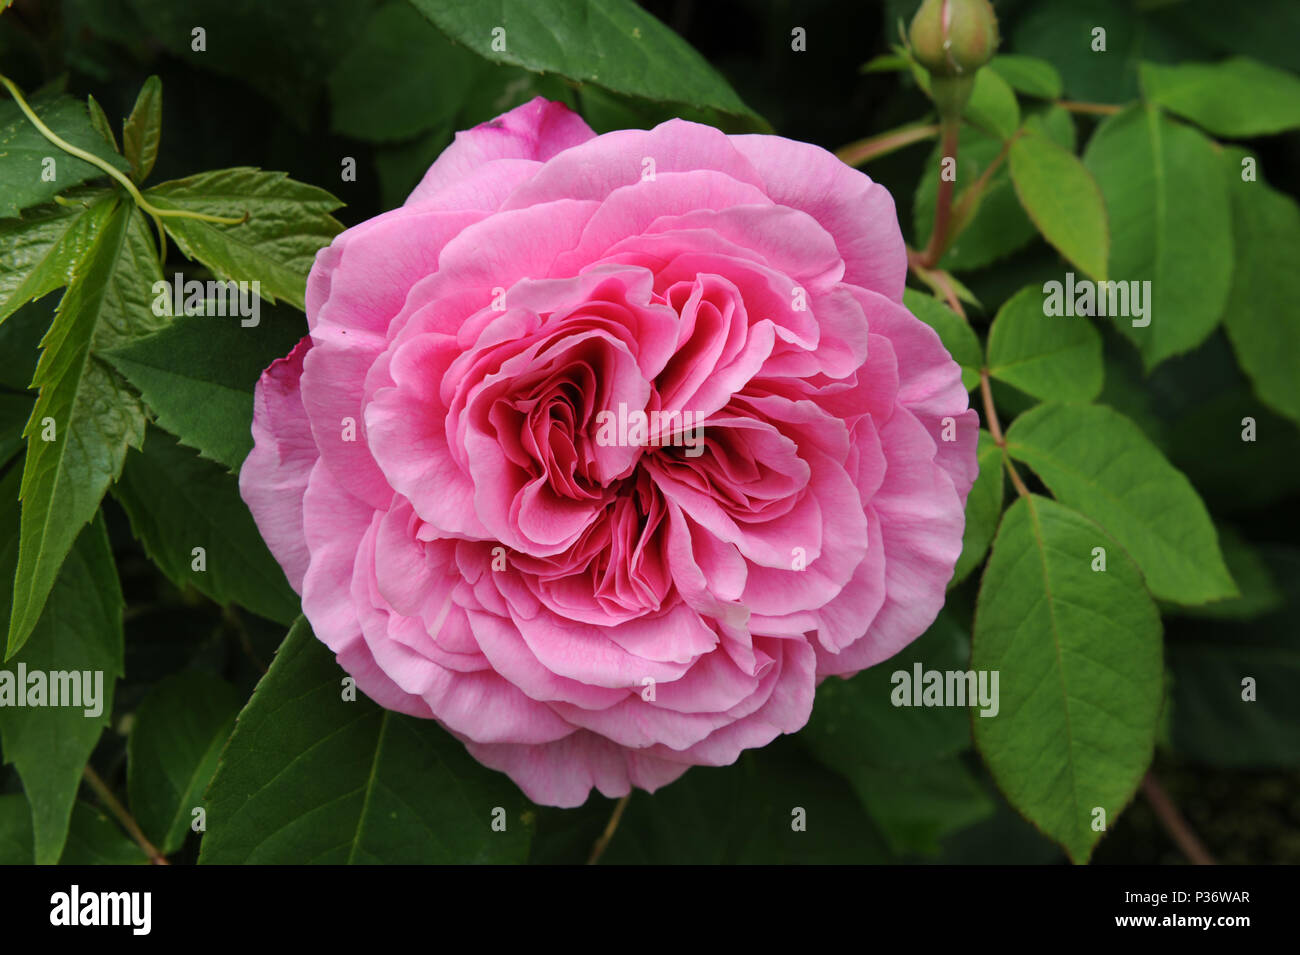 Pink Roses Stock Photo